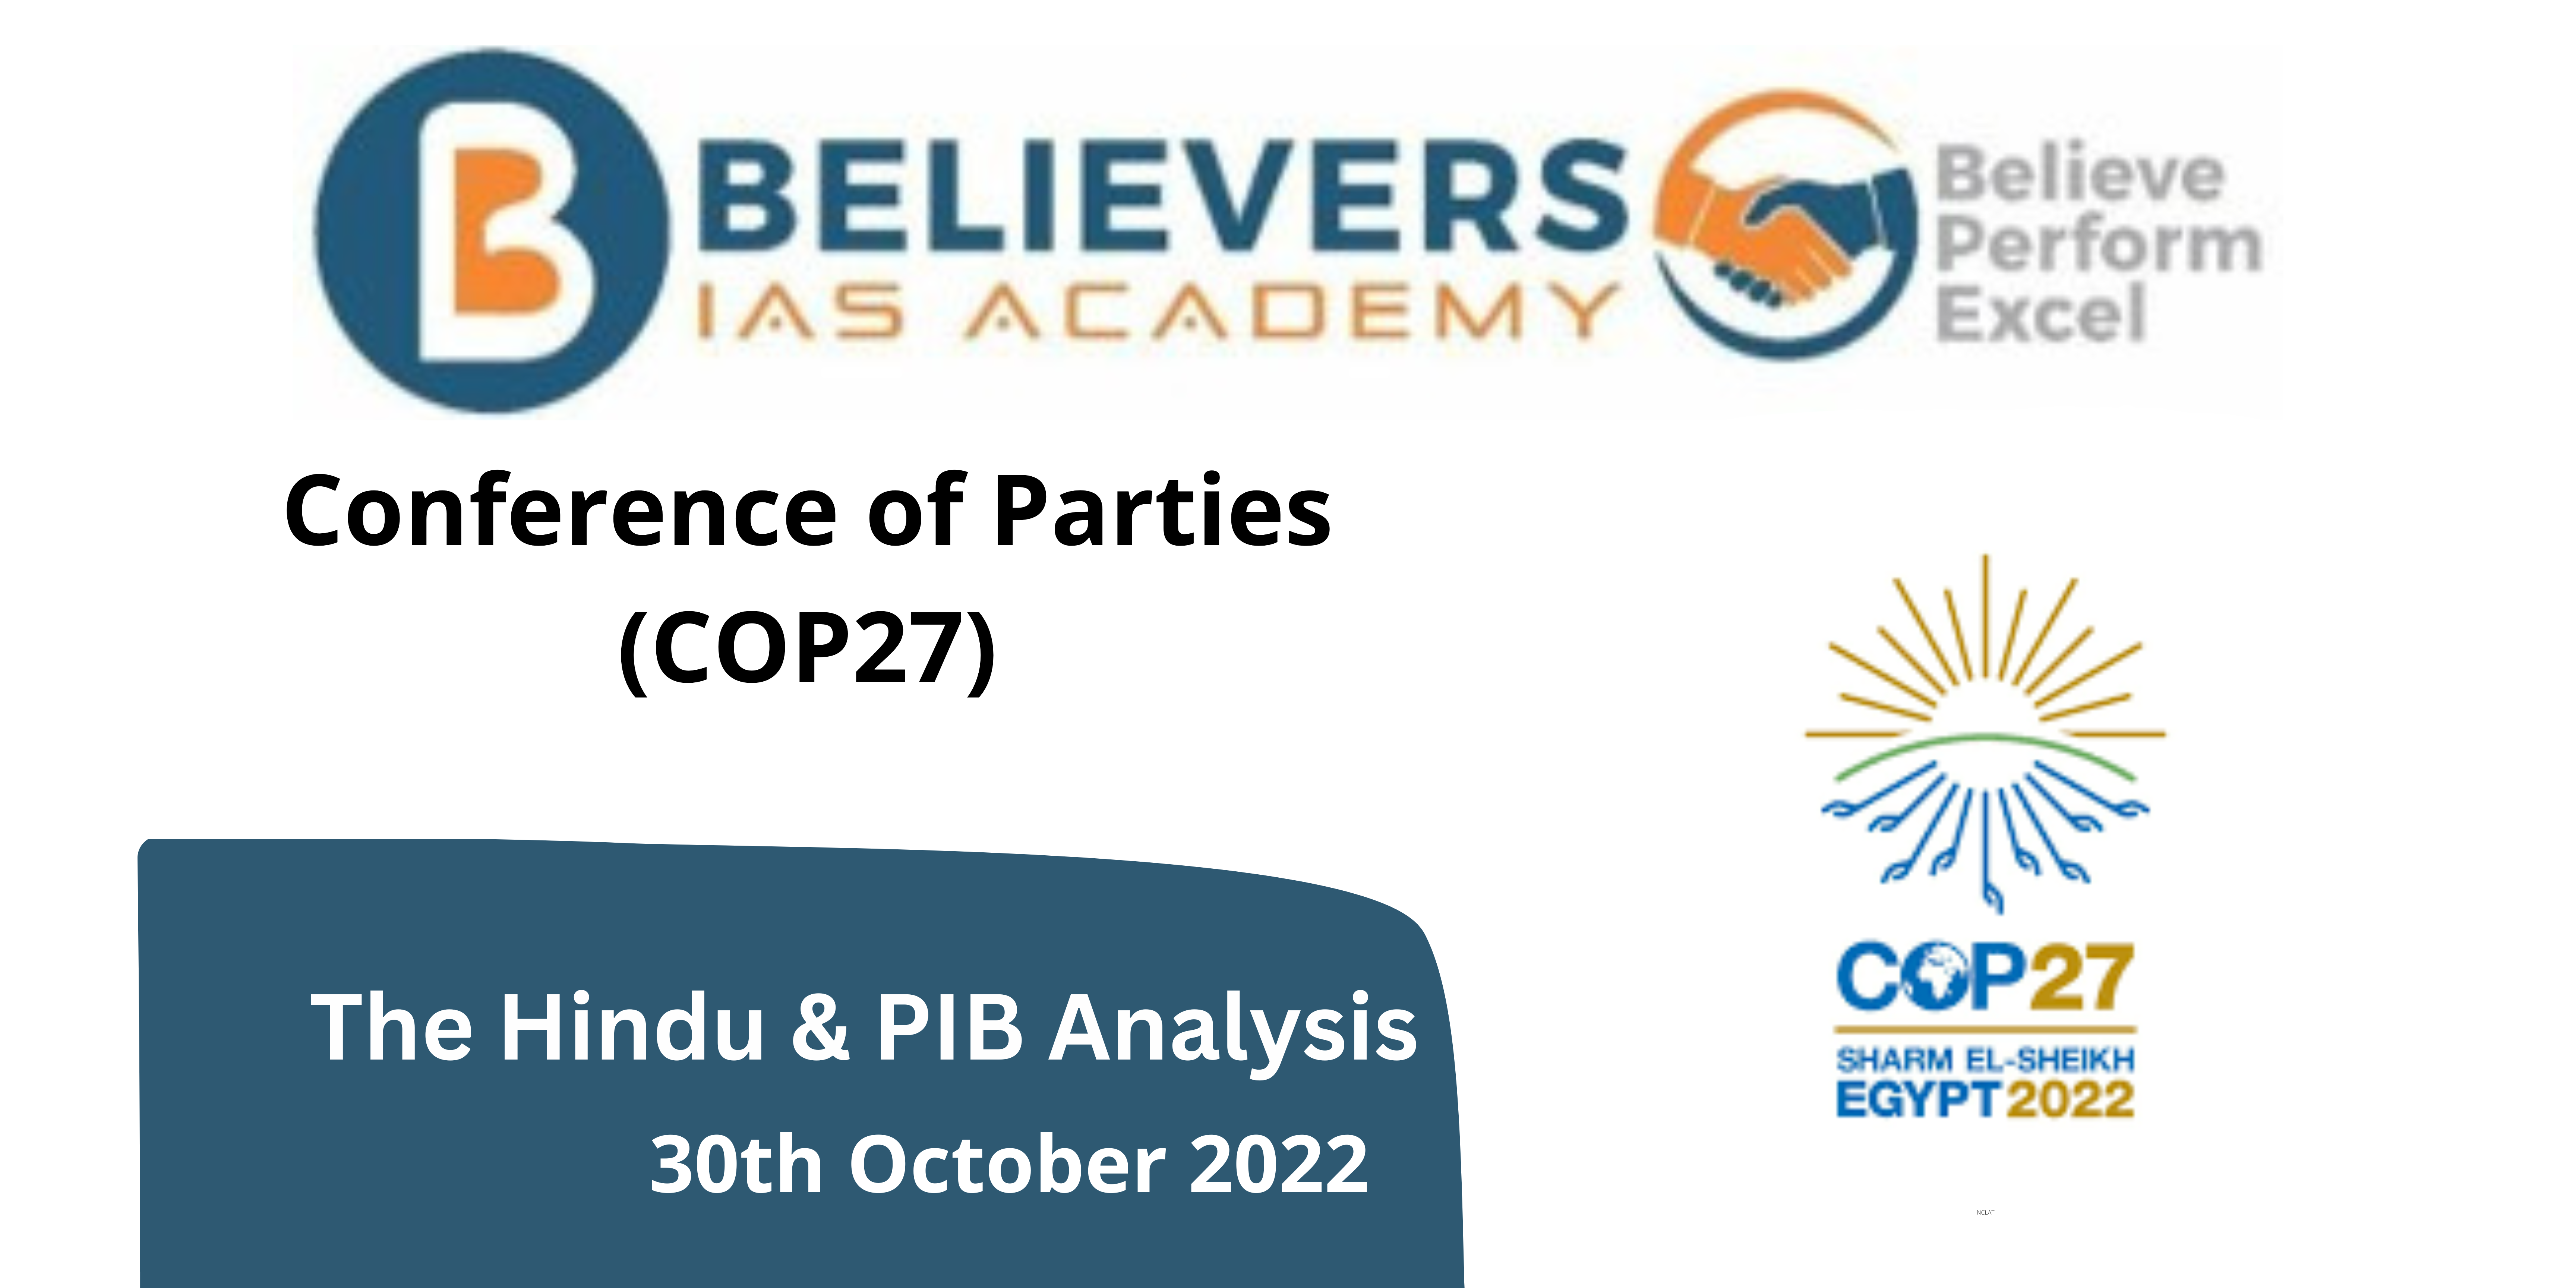 Conference of Parties (COP27)